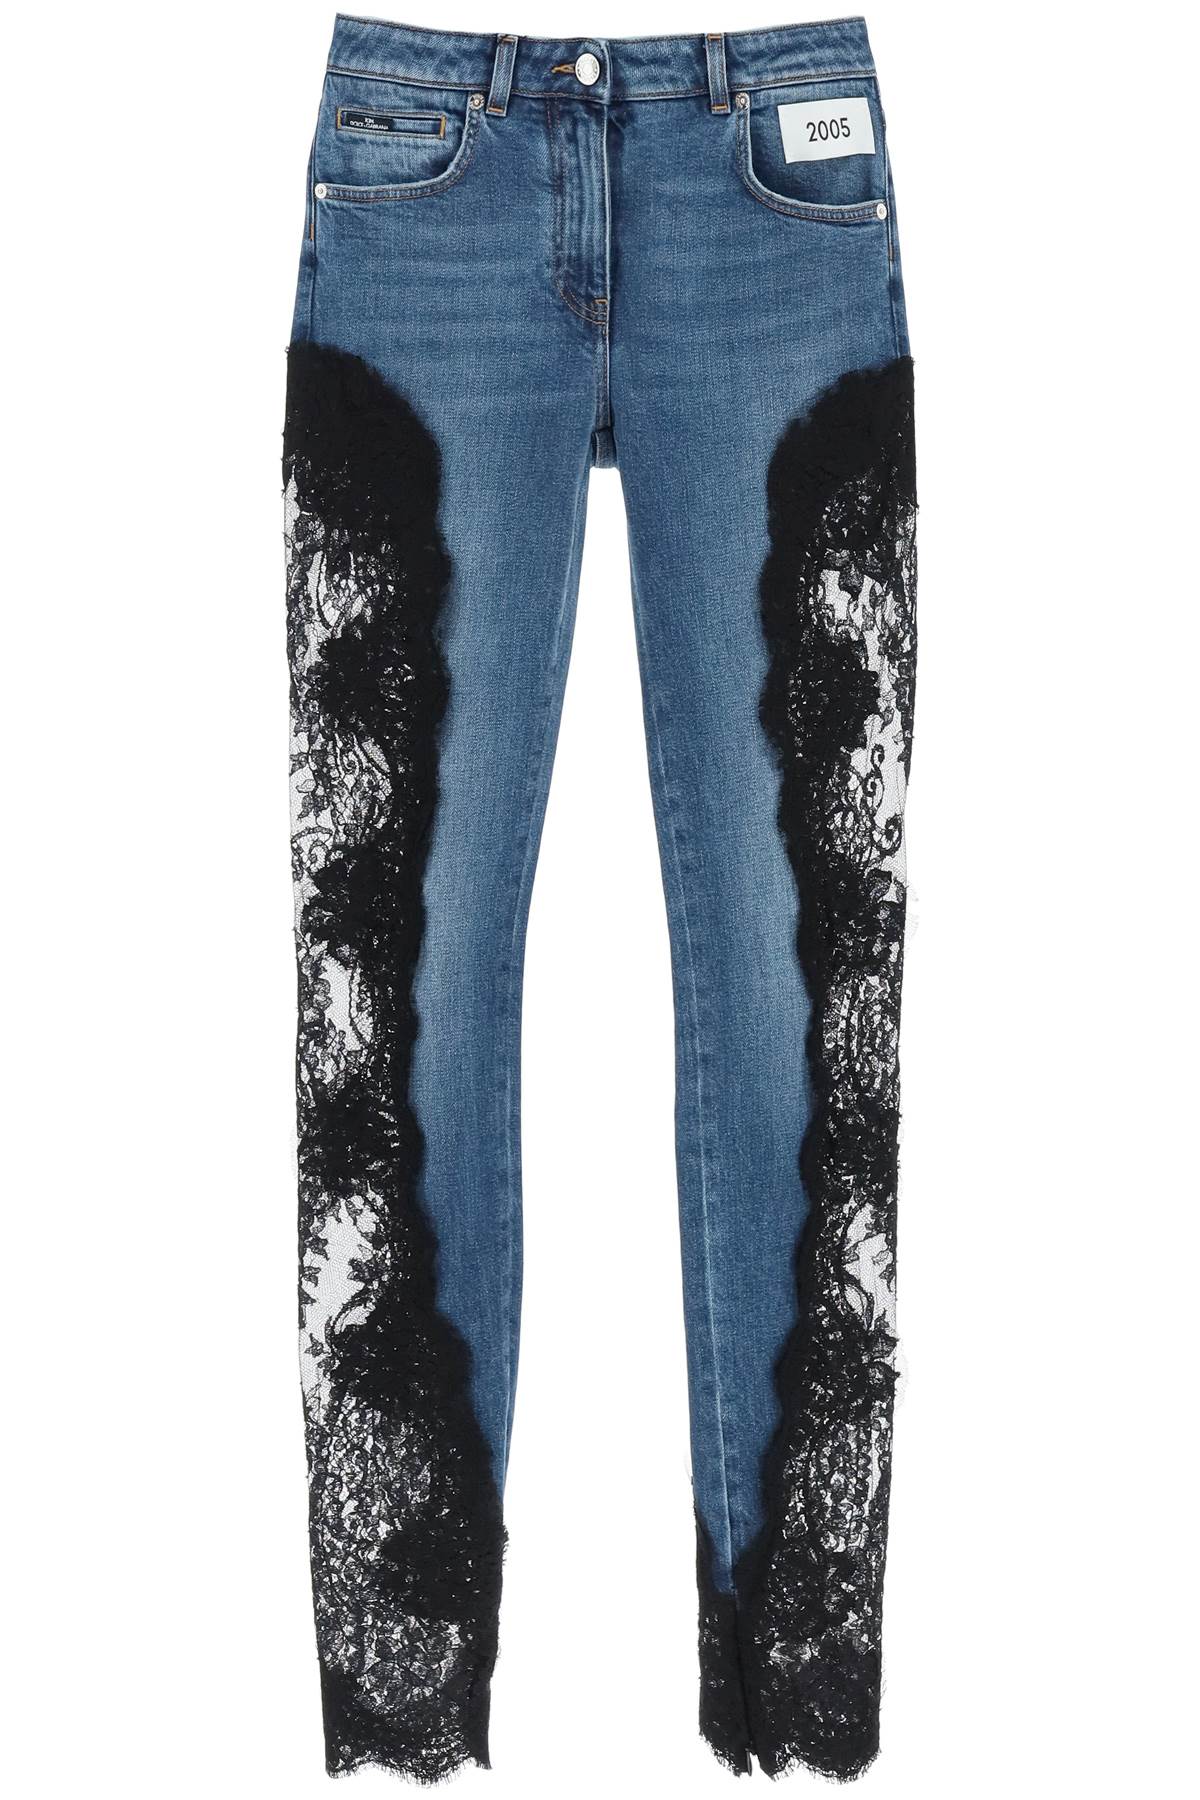 DOLCE & GABBANA SLIM FIT JEANS WITH LACE INSERTS